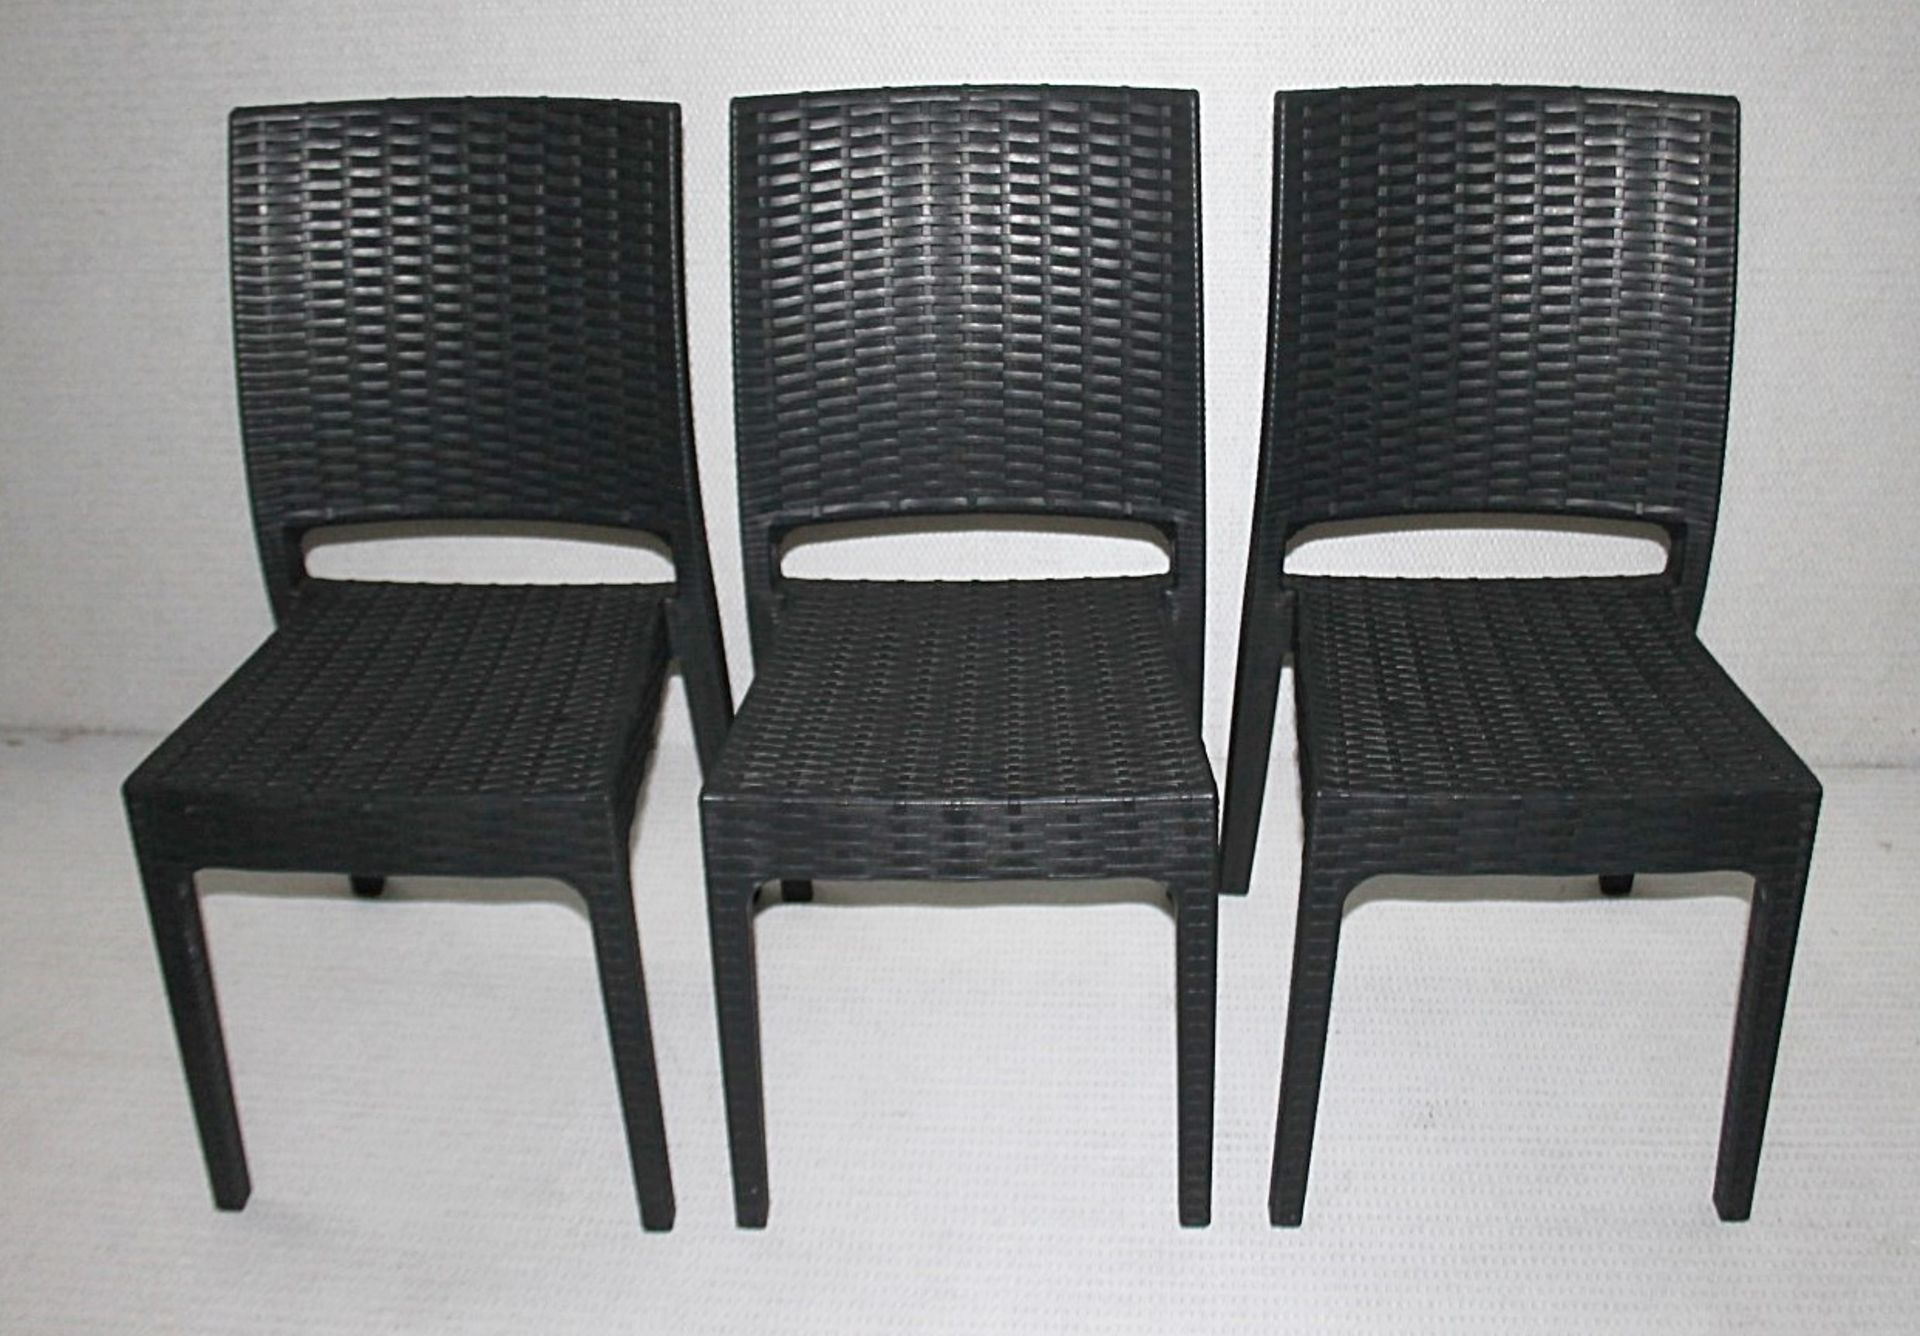 4 x SIESTA EXCLUSIVE 'Florida' Commercial Stackable Rattan-style Chairs In Dark Grey -CL987 - - Image 6 of 13